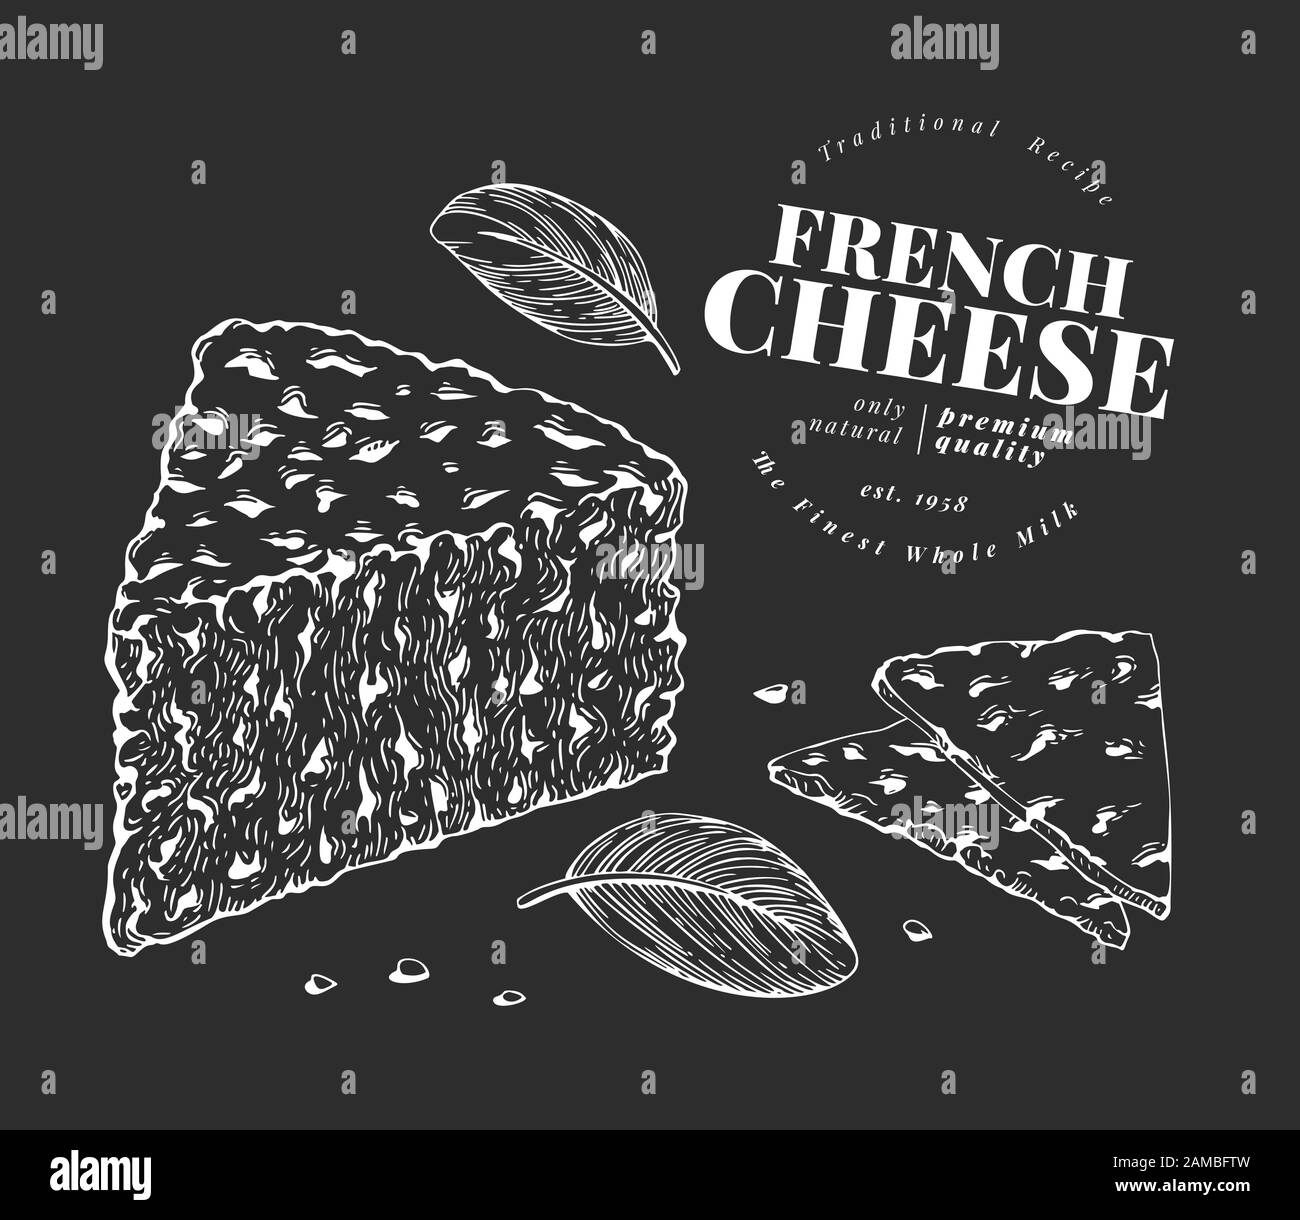 French cheese illustration. Hand drawn vector blue cheese illustration on chalk board. Engraved style gorgonzola. Retro roquefort cheese illustration. Stock Vector